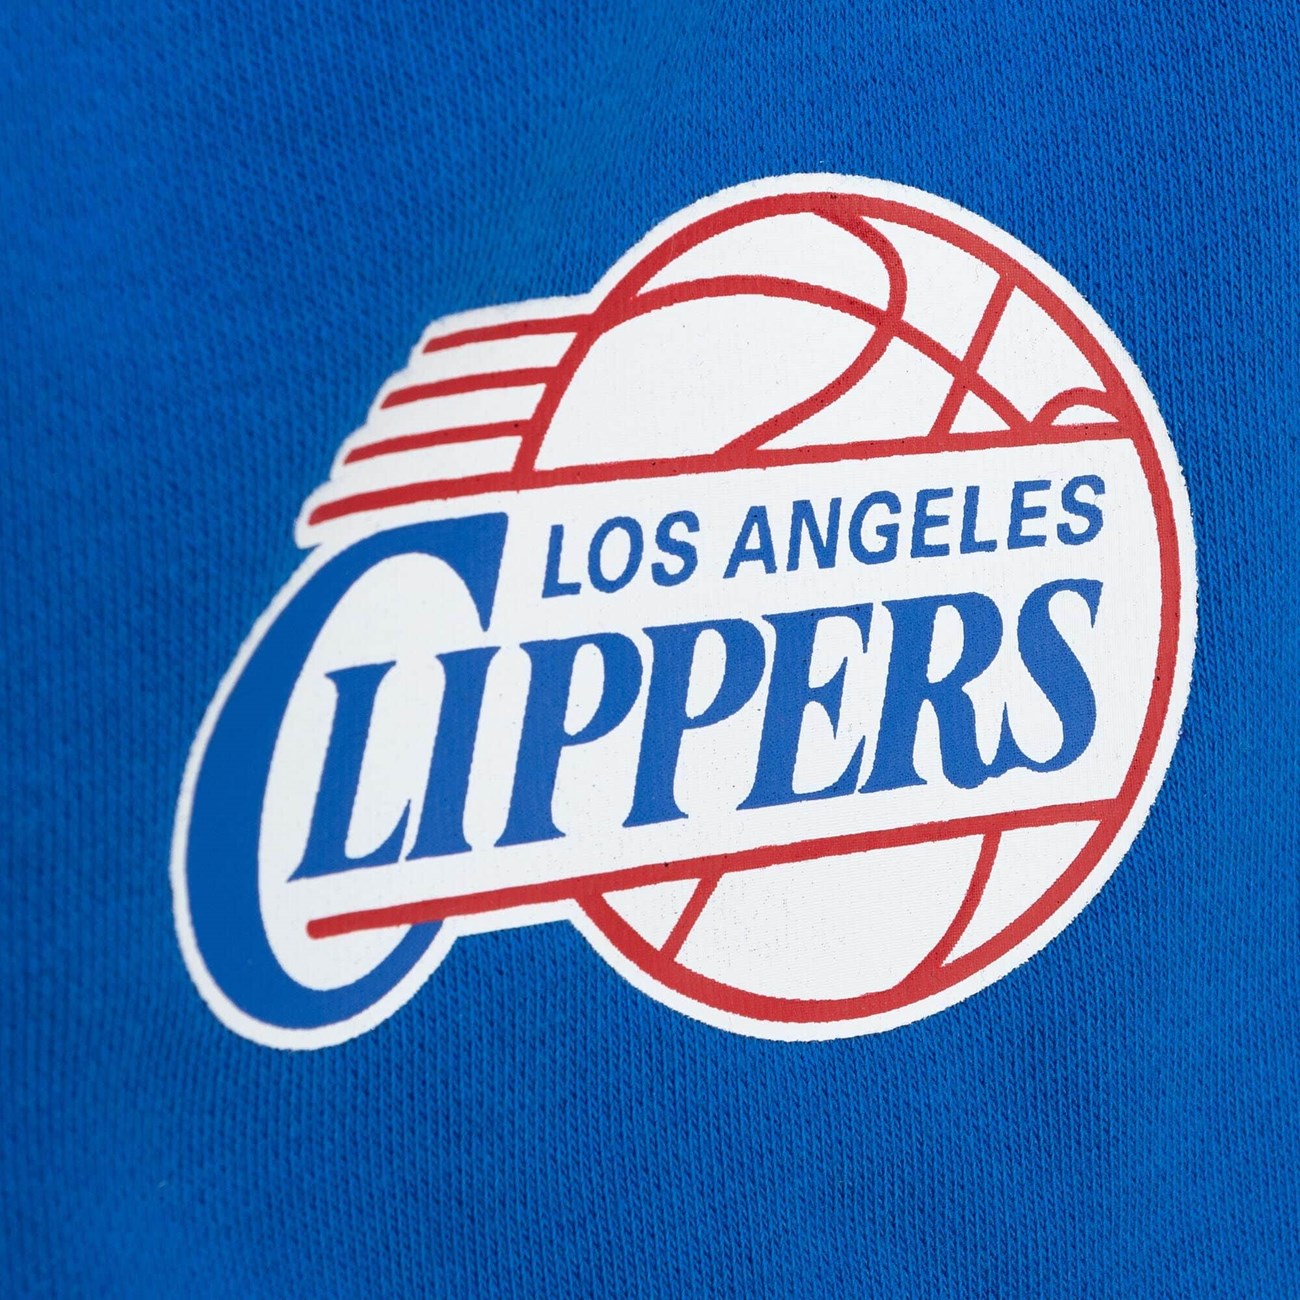 MITCHELL & NESS Ανδρική Βερμούδα Game Day Los Angeles Clippers SHORAJ19075-LACROYA - The Athlete's Foot